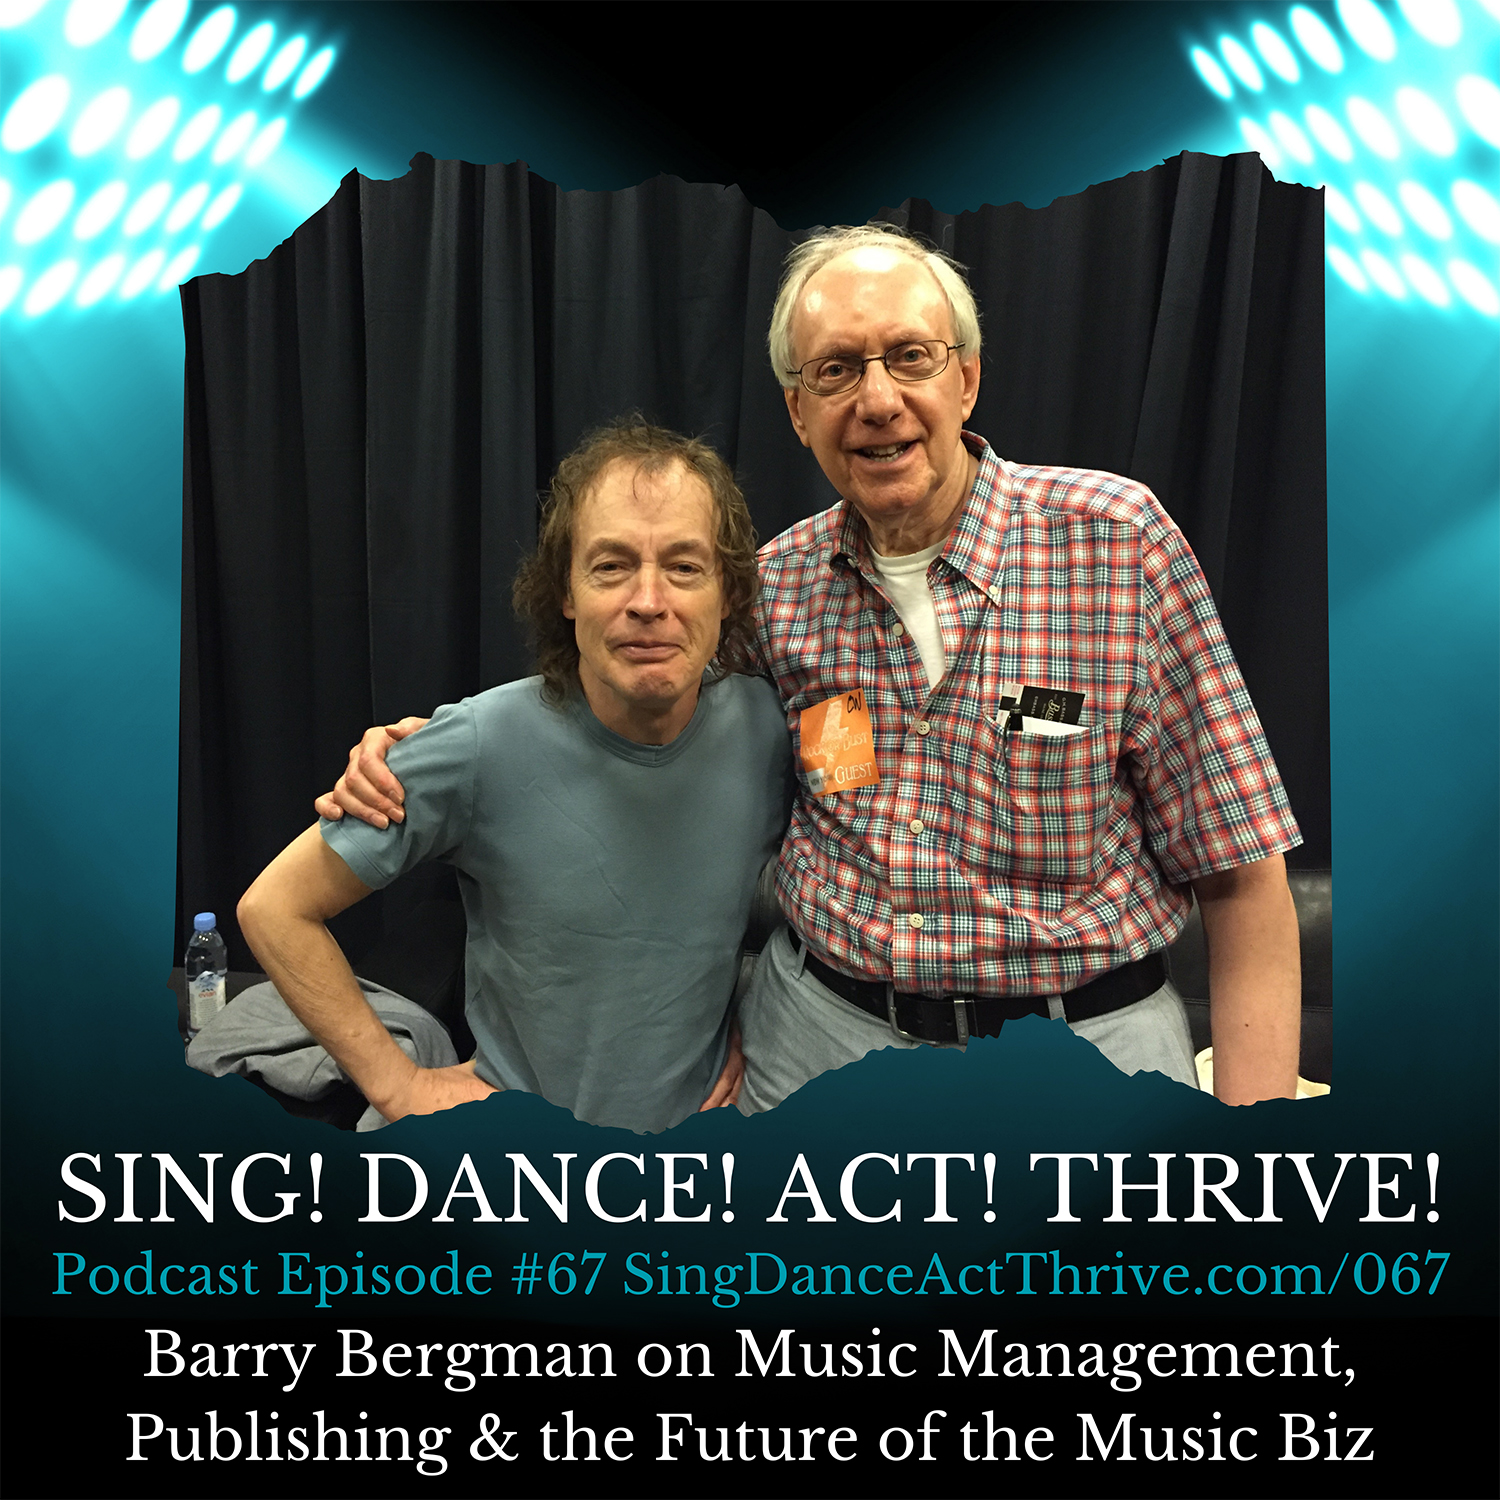 Barry-Bergman-on-Music-Management-Publishing-the-Future-of-the-Music-Biz-on-Sing-Dance-Act-Thrive-Podcast